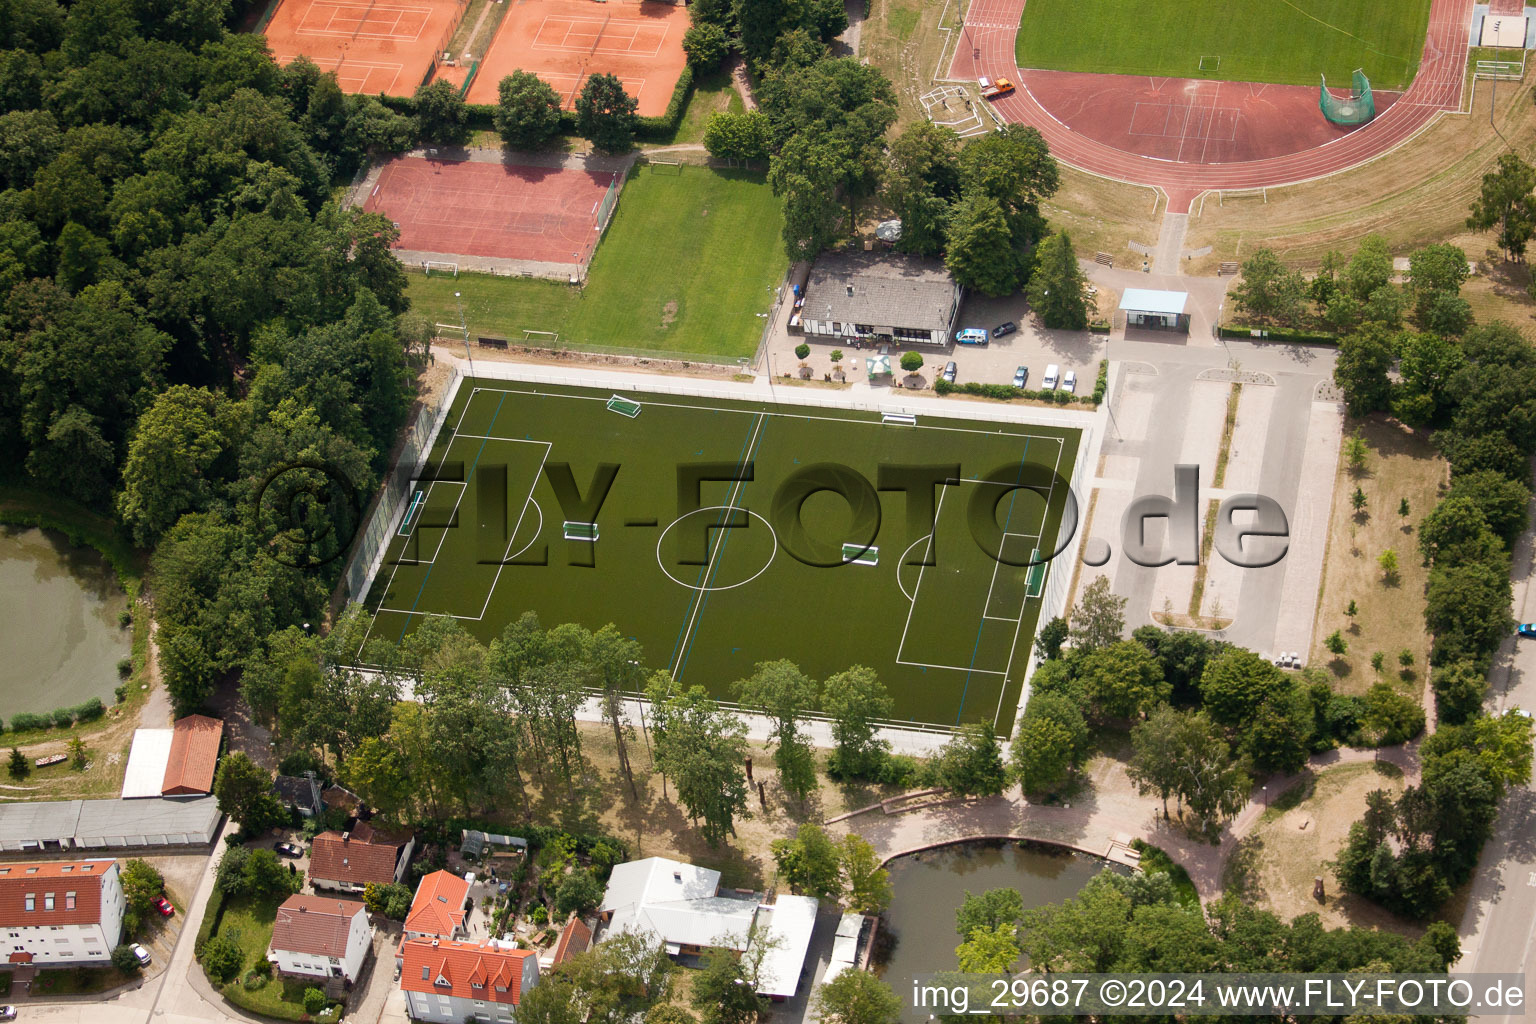 Artificial turf soccer field in Kandel in the state Rhineland-Palatinate, Germany